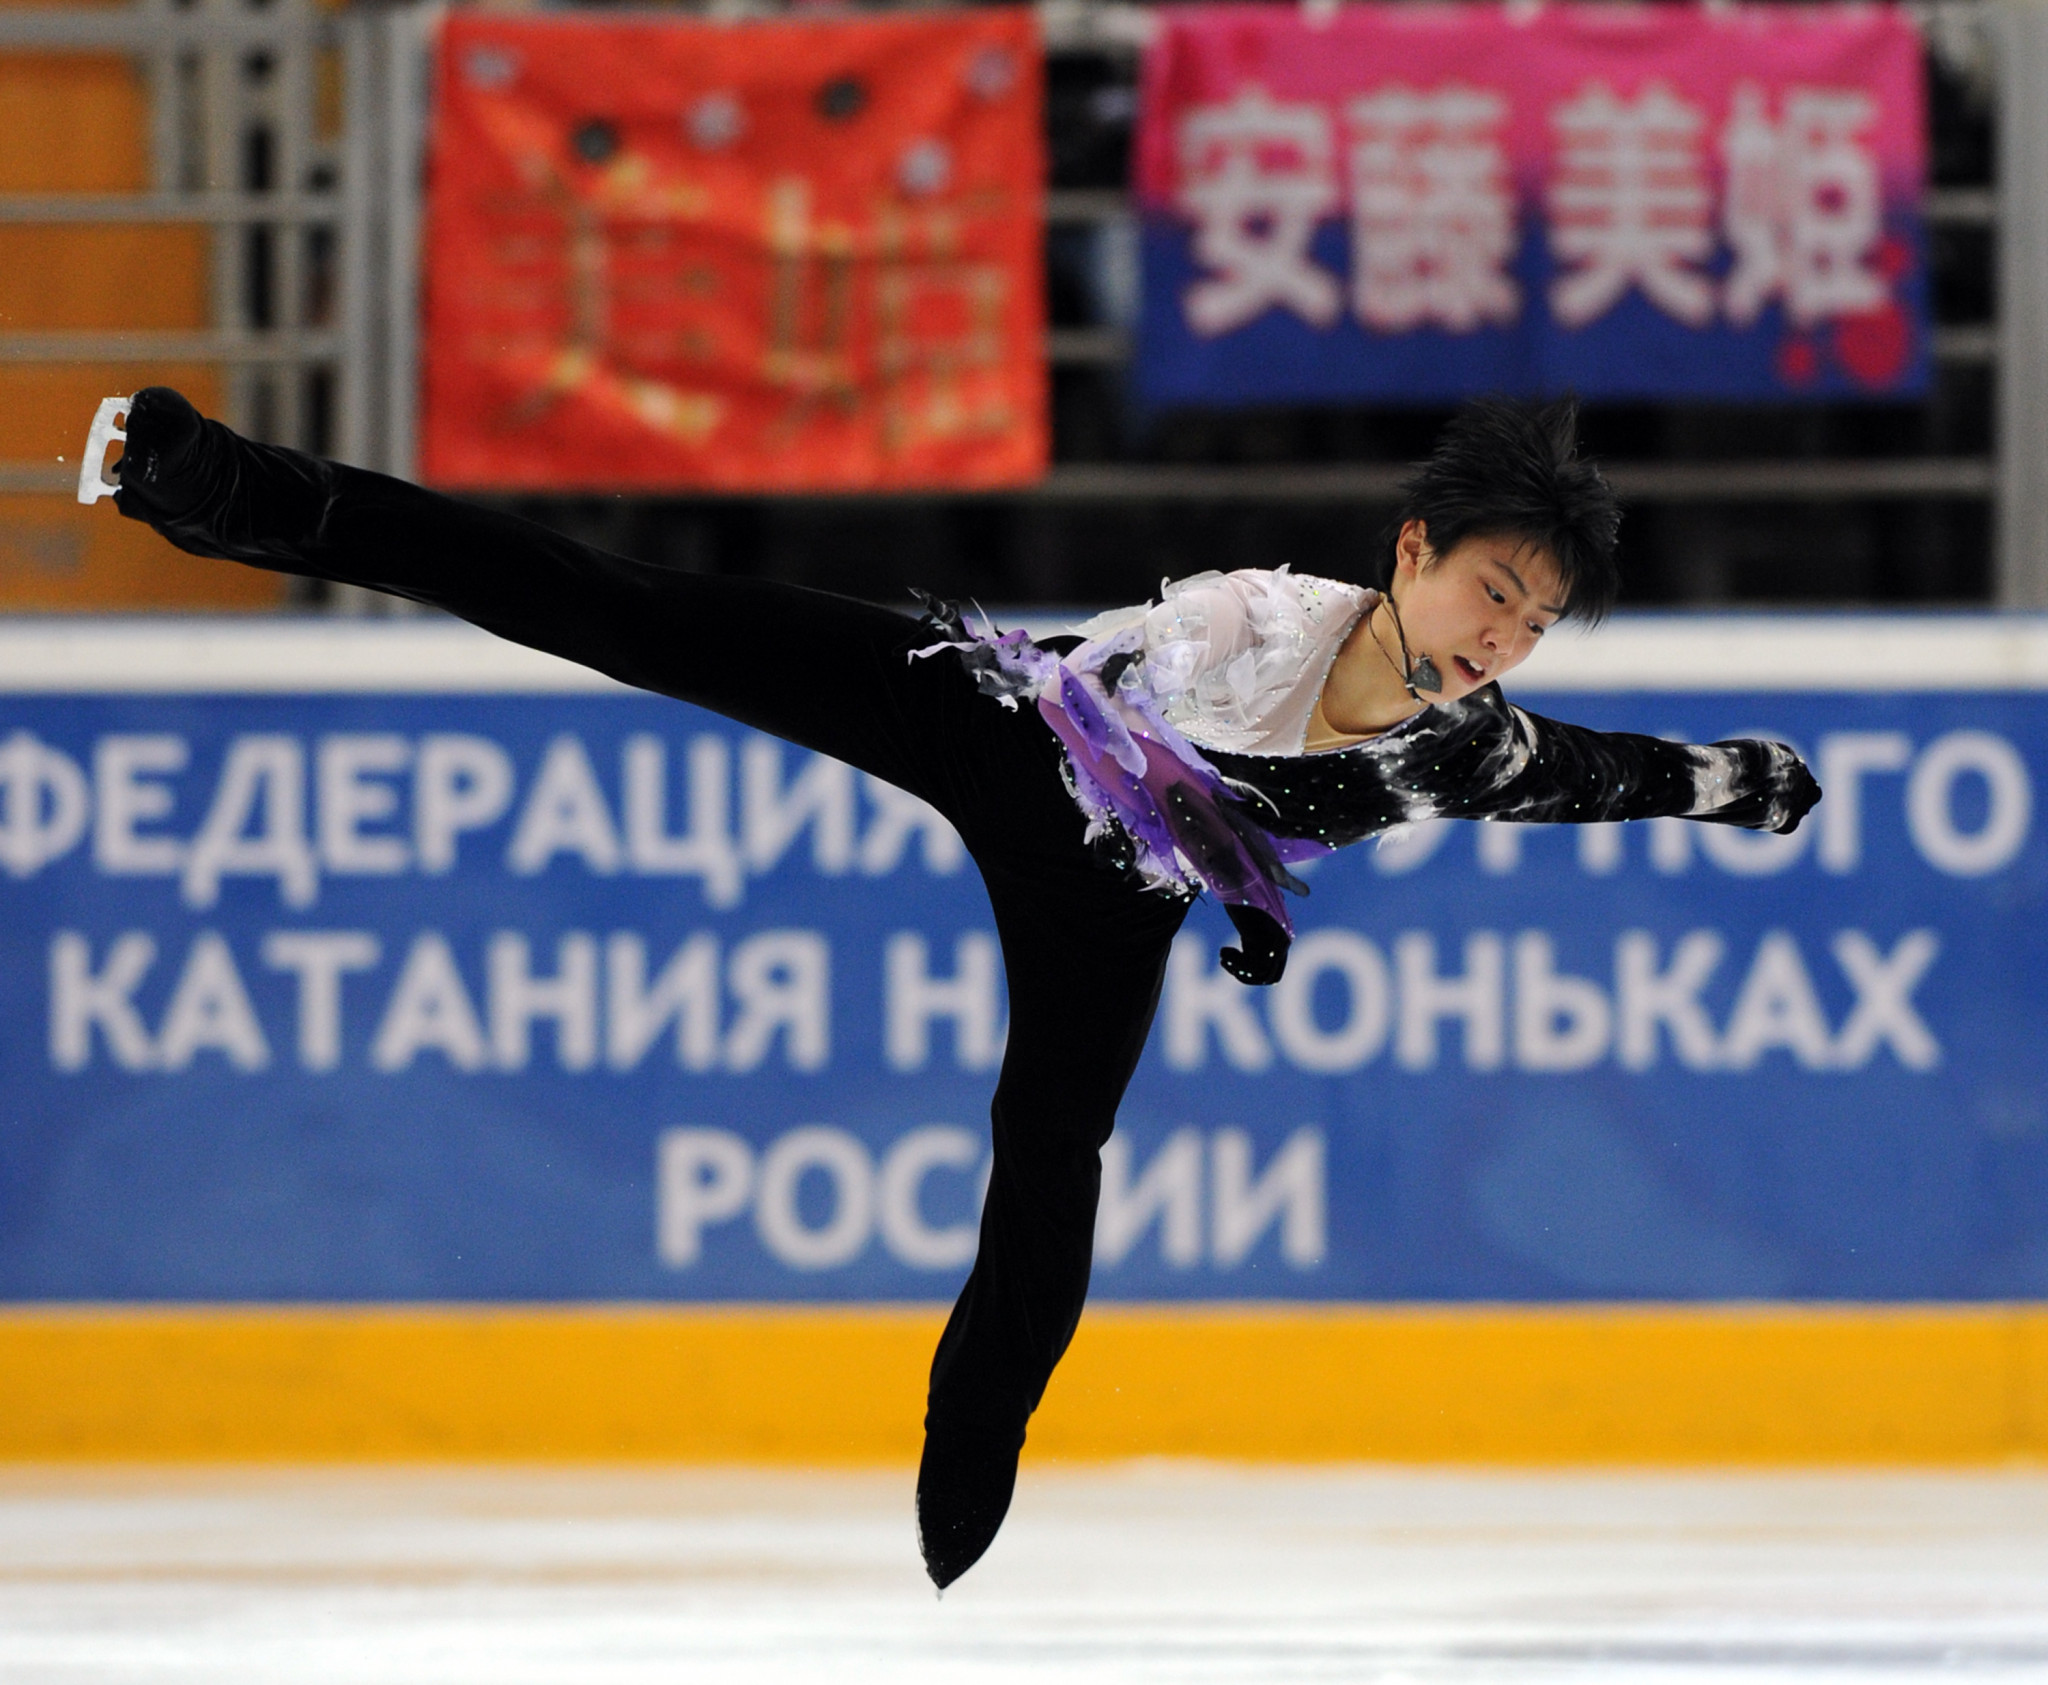 Yuzuru Hanyu has won the Cup of Russia on two previous occasions, in 2011 and 2018 ©Getty Images